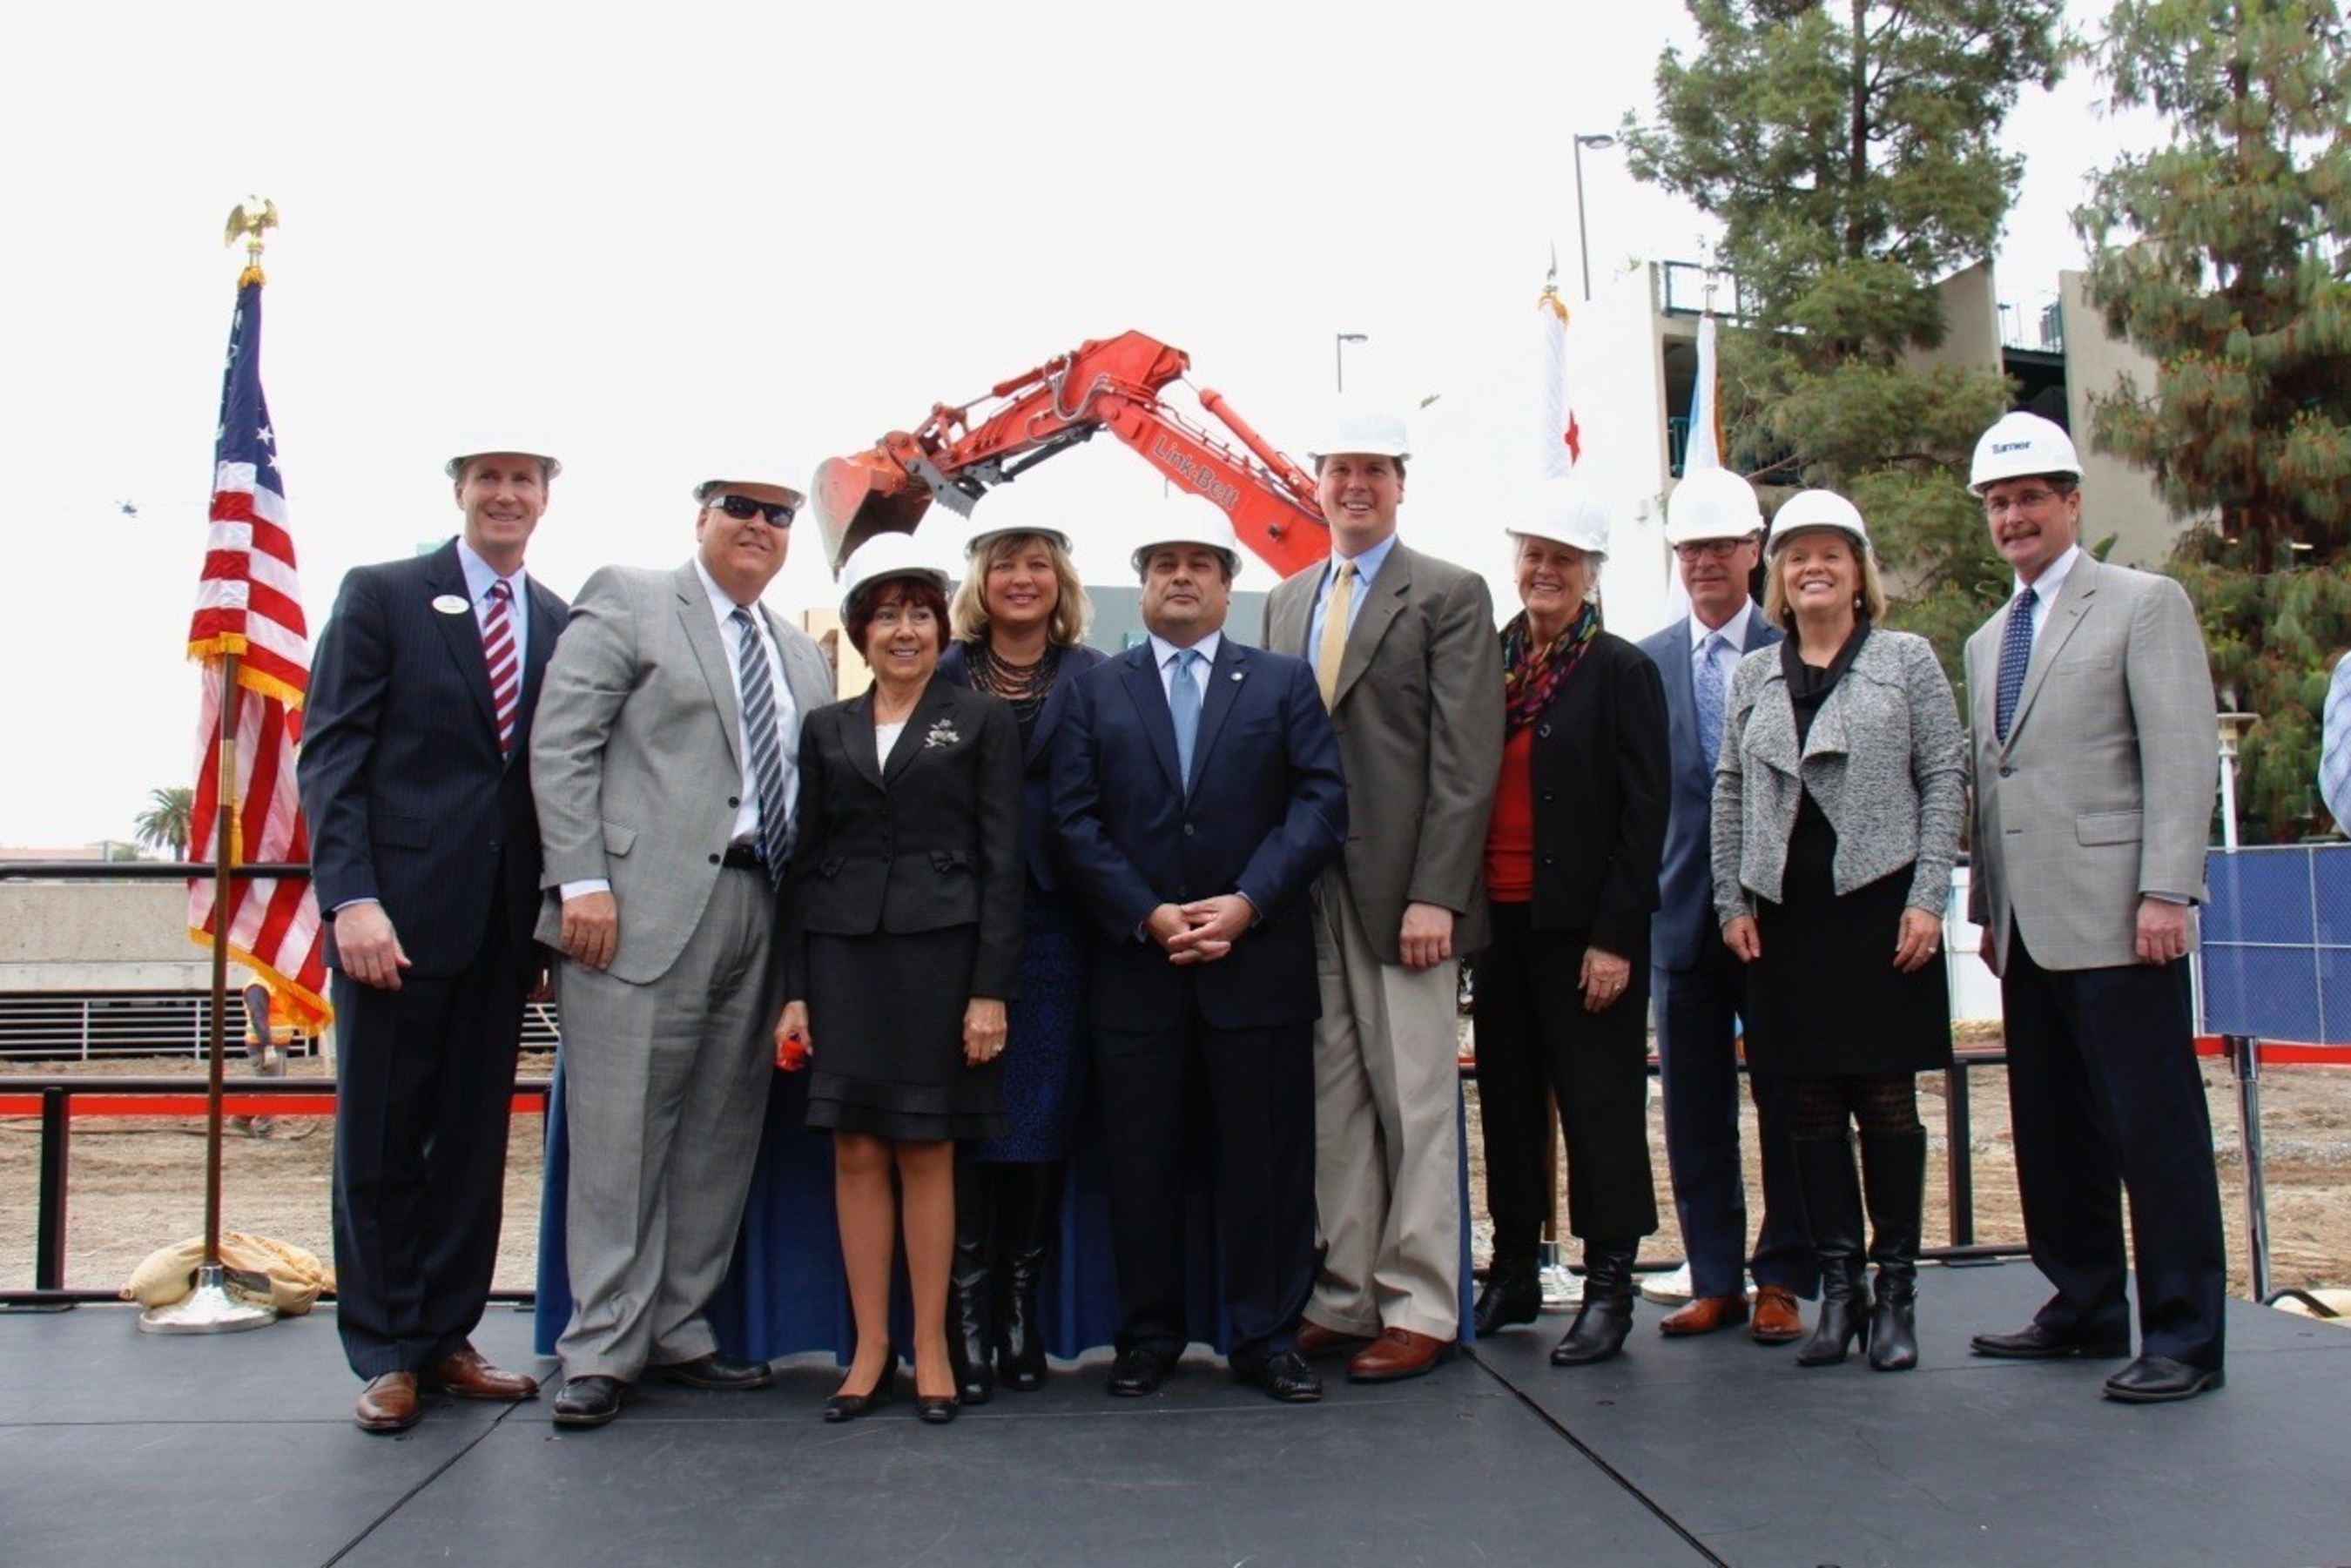 Anaheim Convention Center, the largest convention center on the west coast, breaks ground on its seventh expansion, adding 200,000 sq. ft. more of flexible meeting space. (Credit: Anaheim/Orange County Visitor & Convention Bureau)